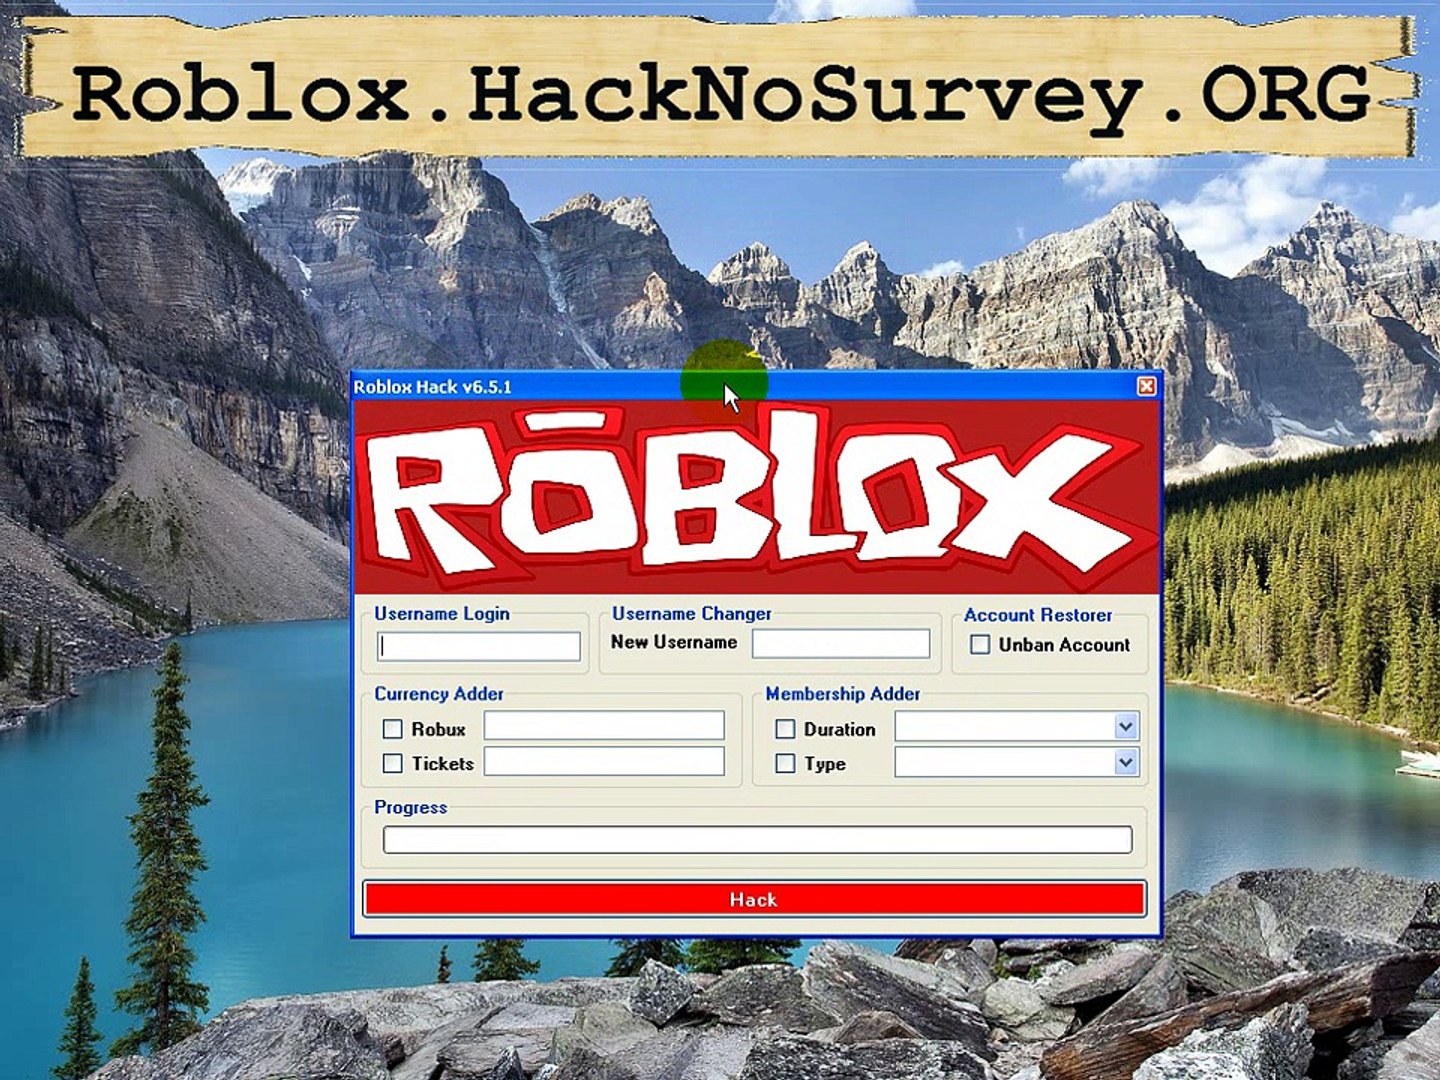 Roblox Cheats Engine Final 2015 For Unlimited Robux Or Tix No Survey 2015 Video Dailymotion - roblox hack v6 5